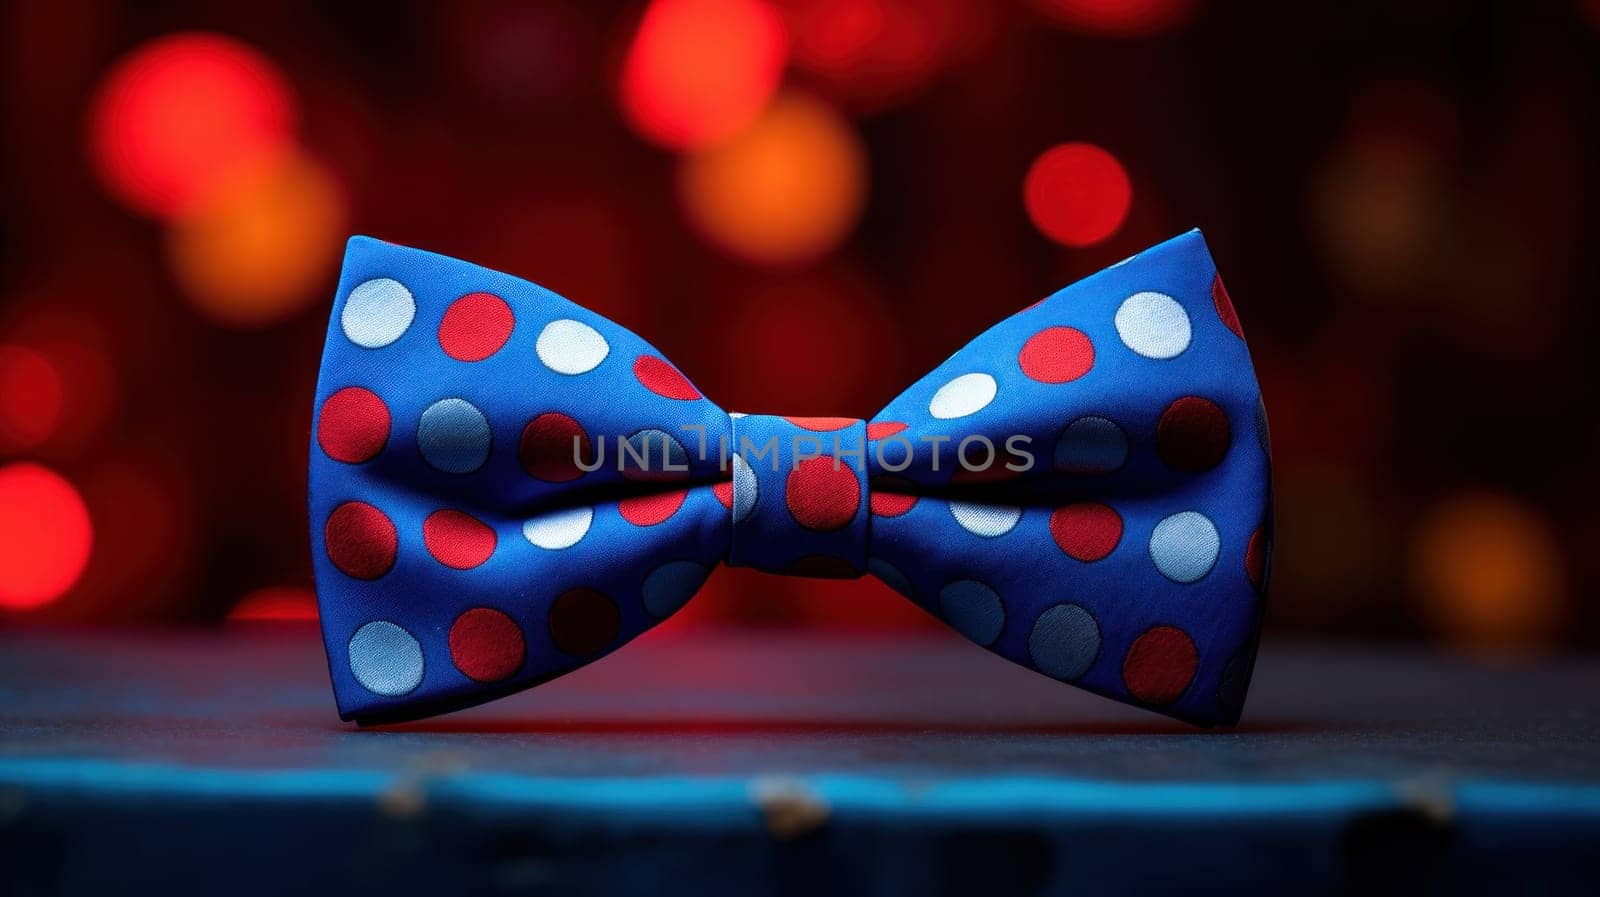 A blue bow tie with red and white polka dots on it